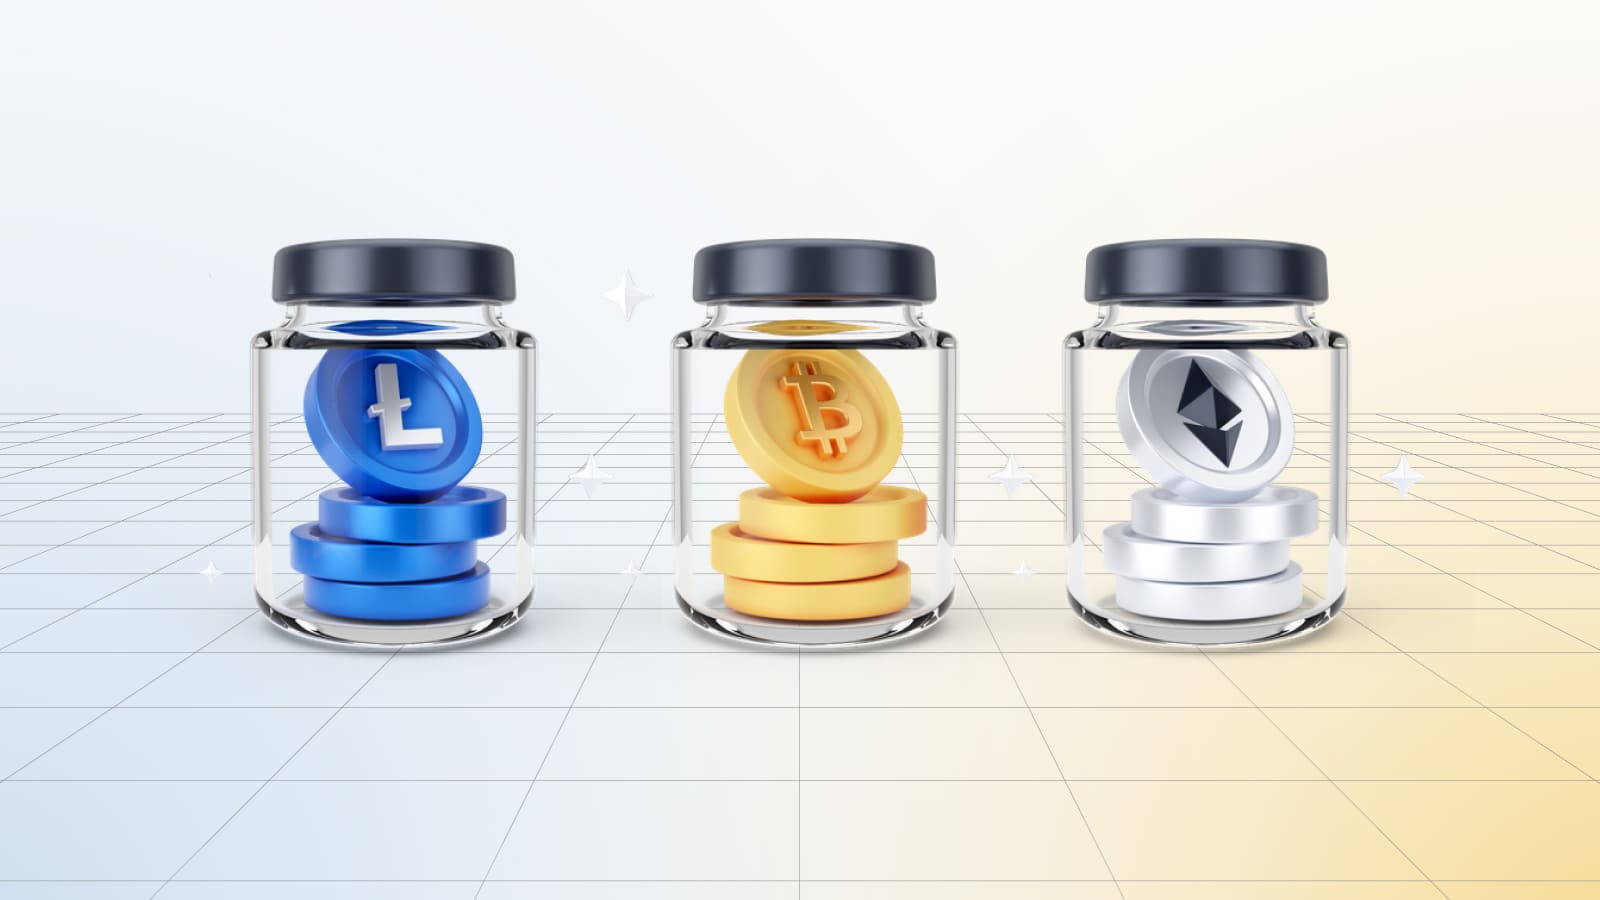 In this article, we'll explore the various cryptocurrency storage options.